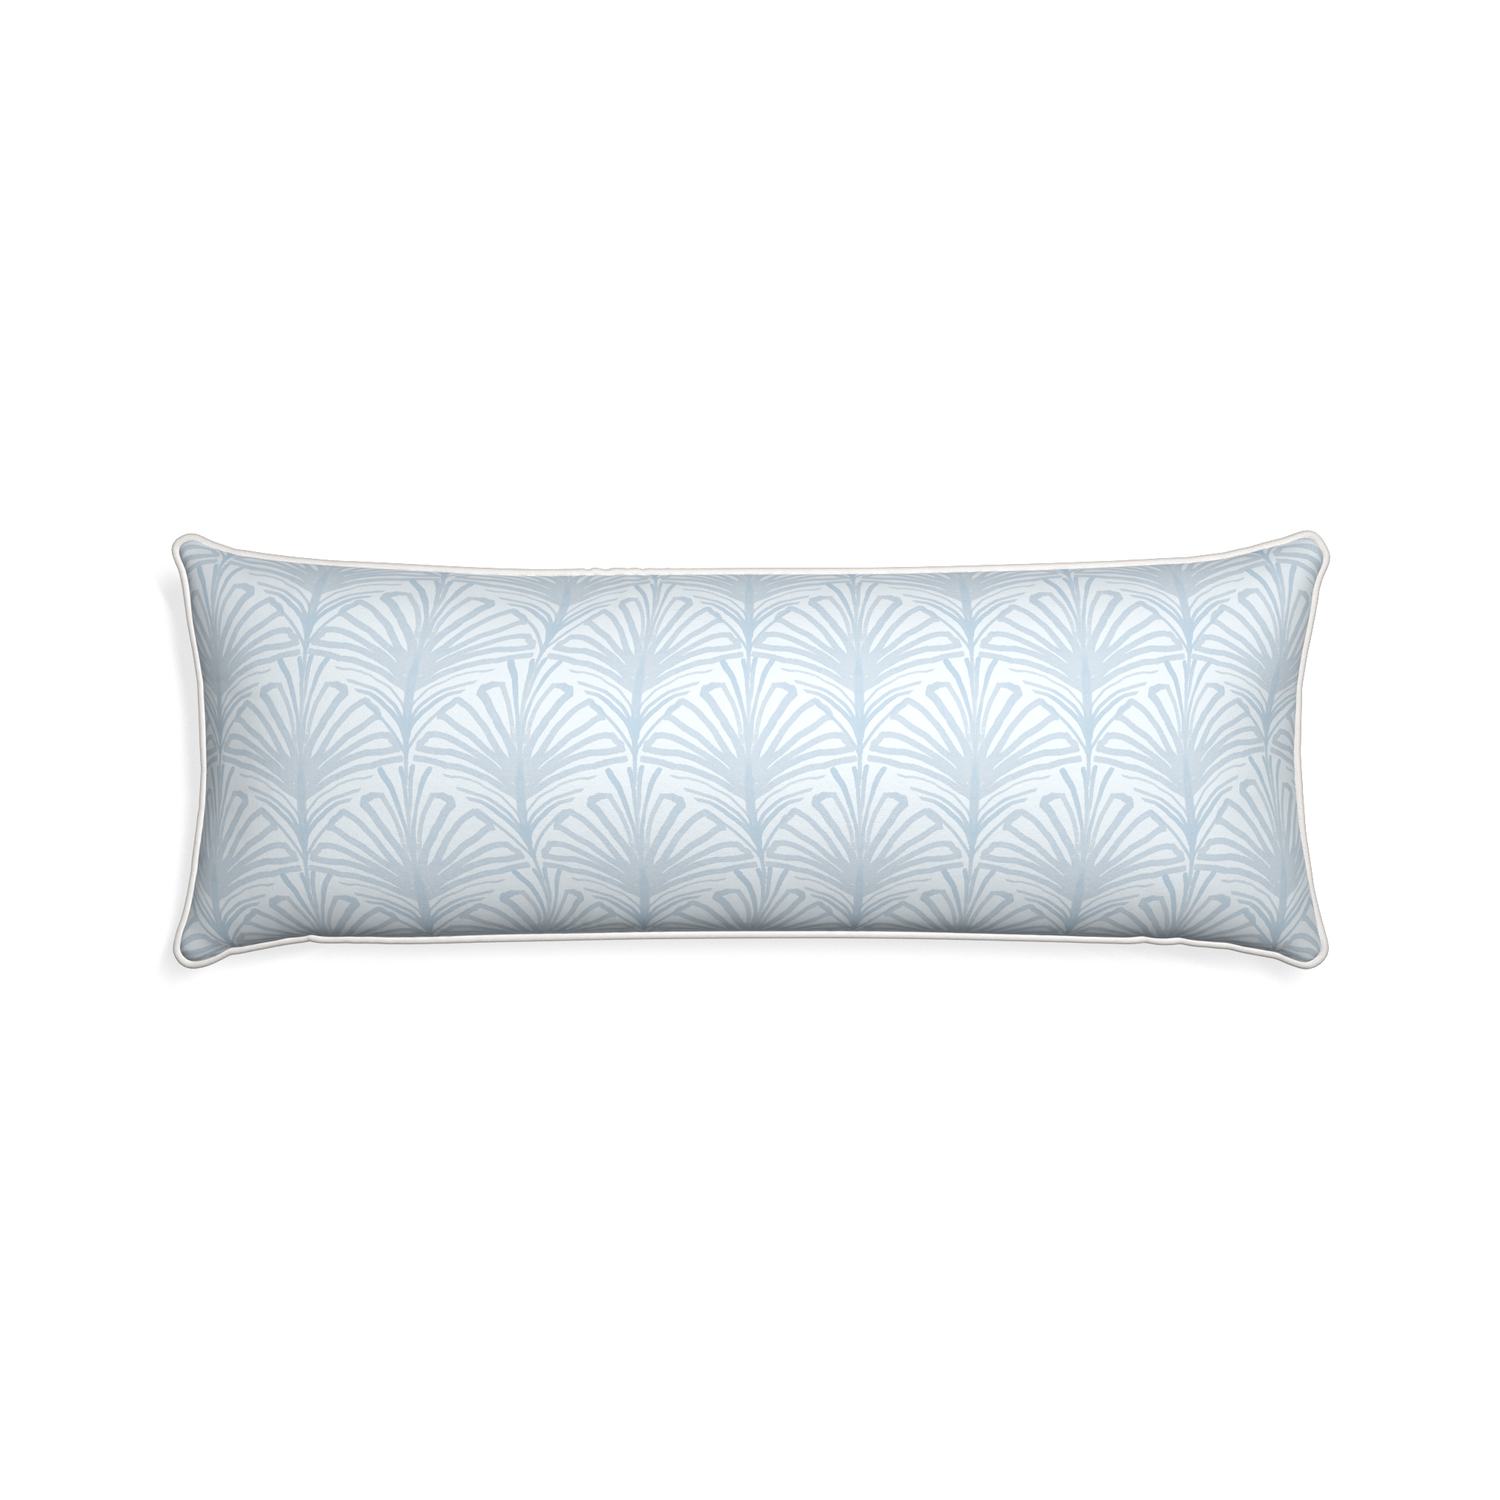 Xl-lumbar suzy sky custom pillow with snow piping on white background